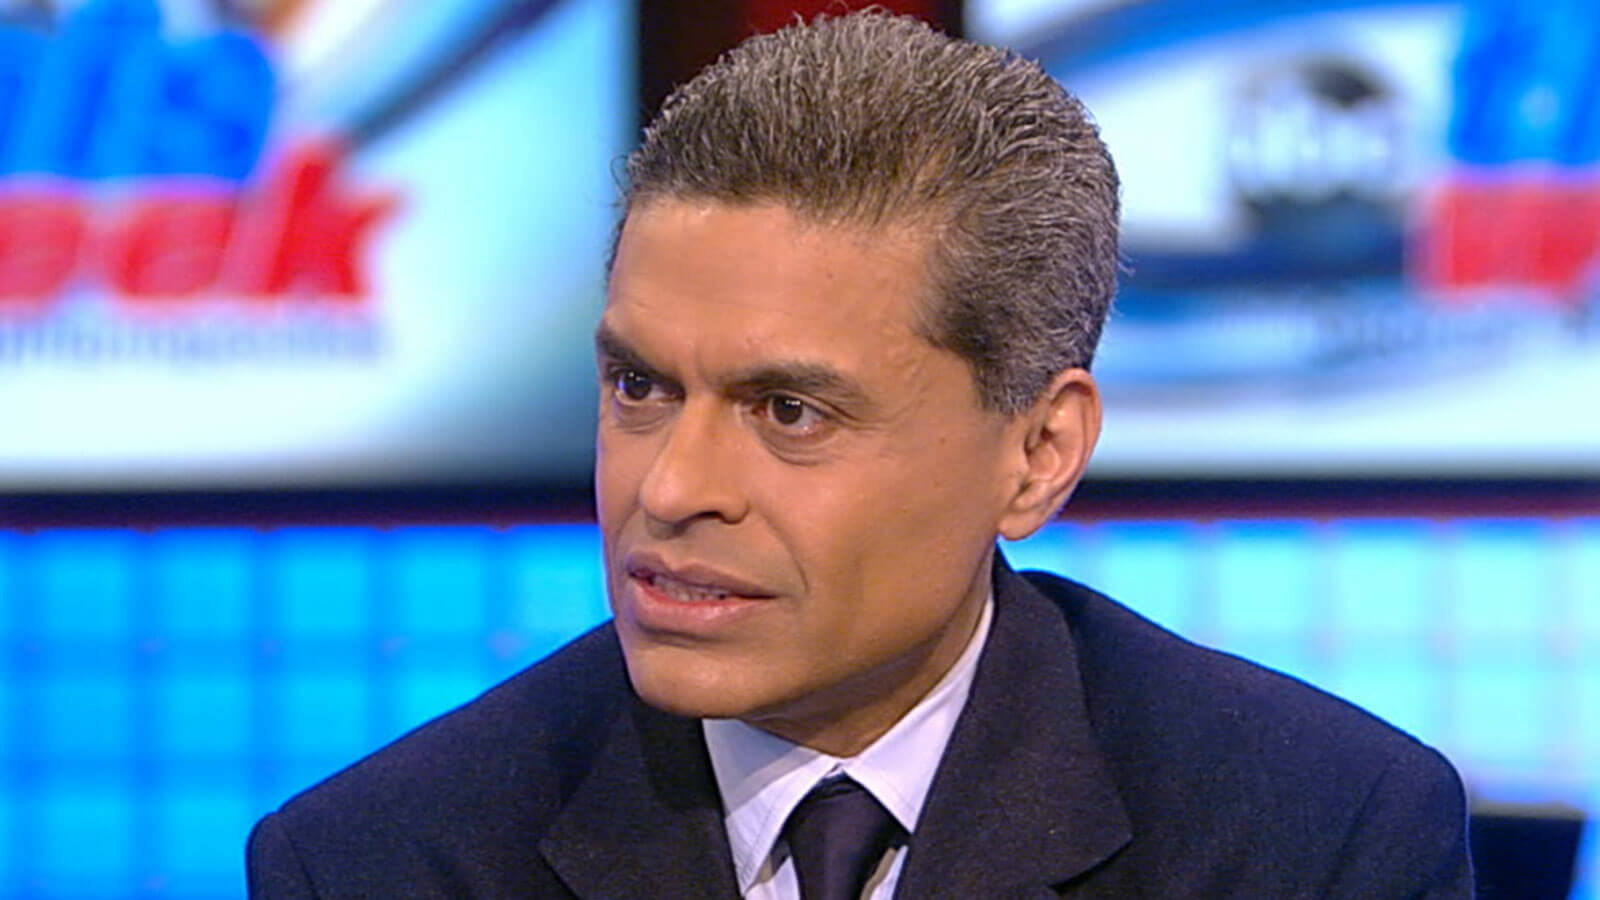 Fareed Zakaria in front of a cnn-style background.